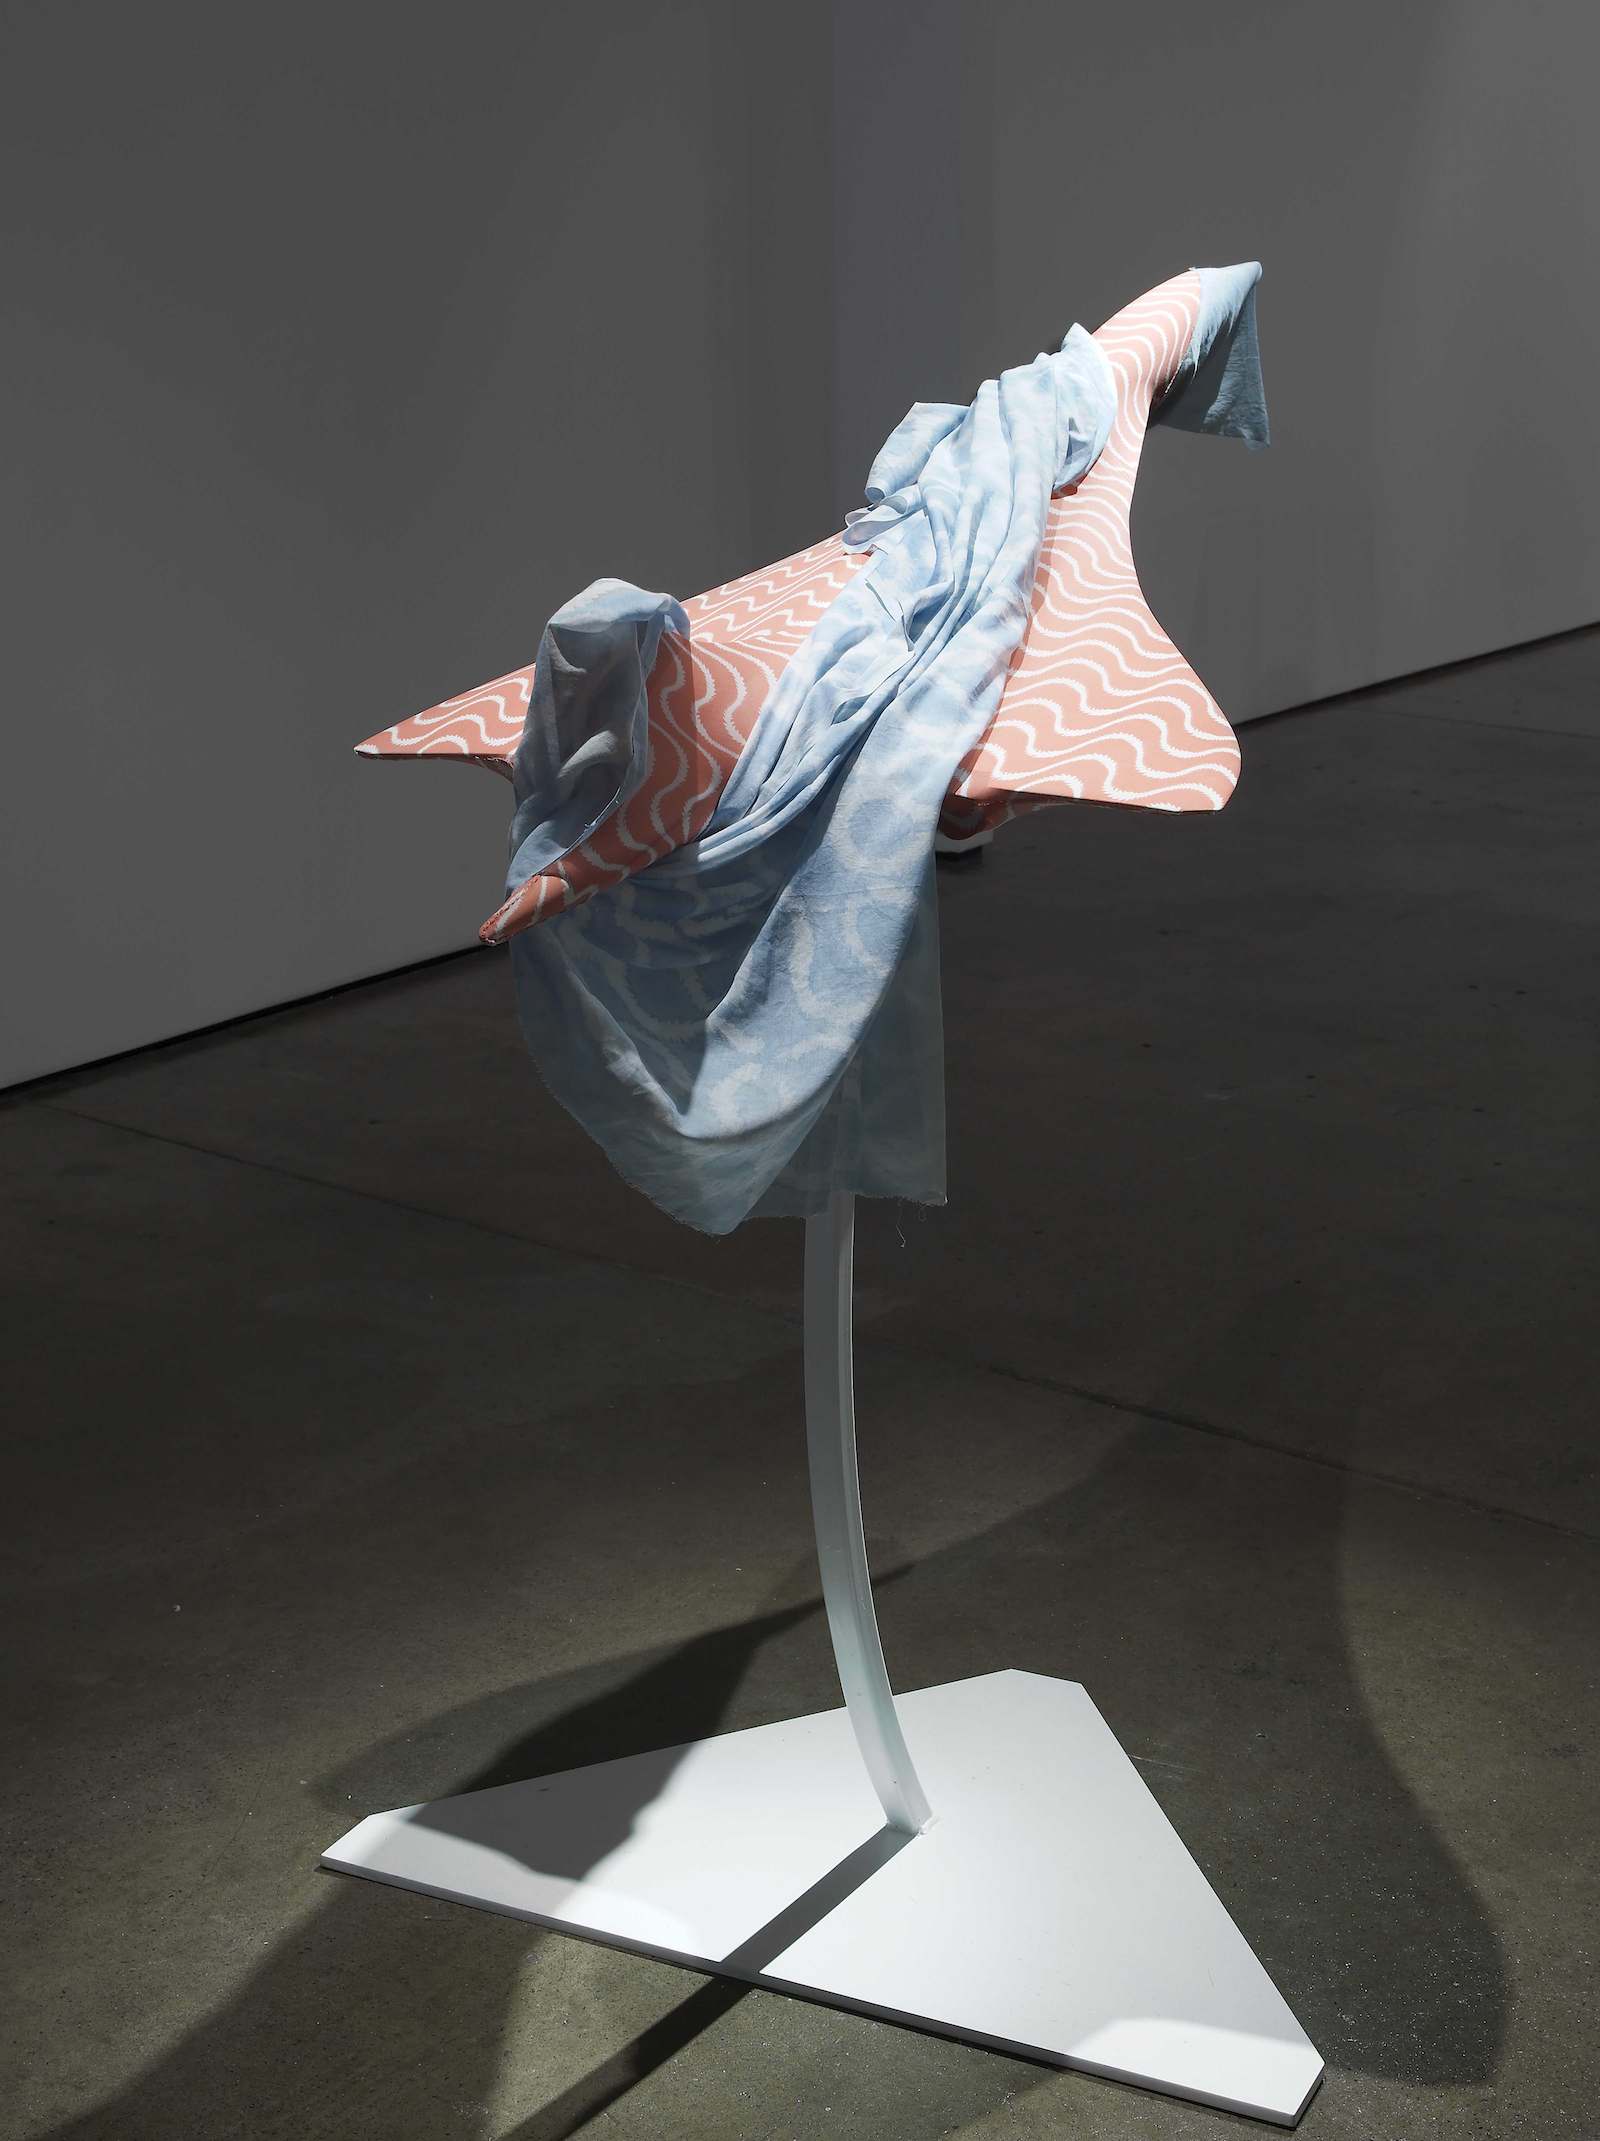      White Elephant (Pirate)   2010   Fabric, scale model airplane, stand   134 x 172 x 78.7 cm / 53 x 68 x 31 in  